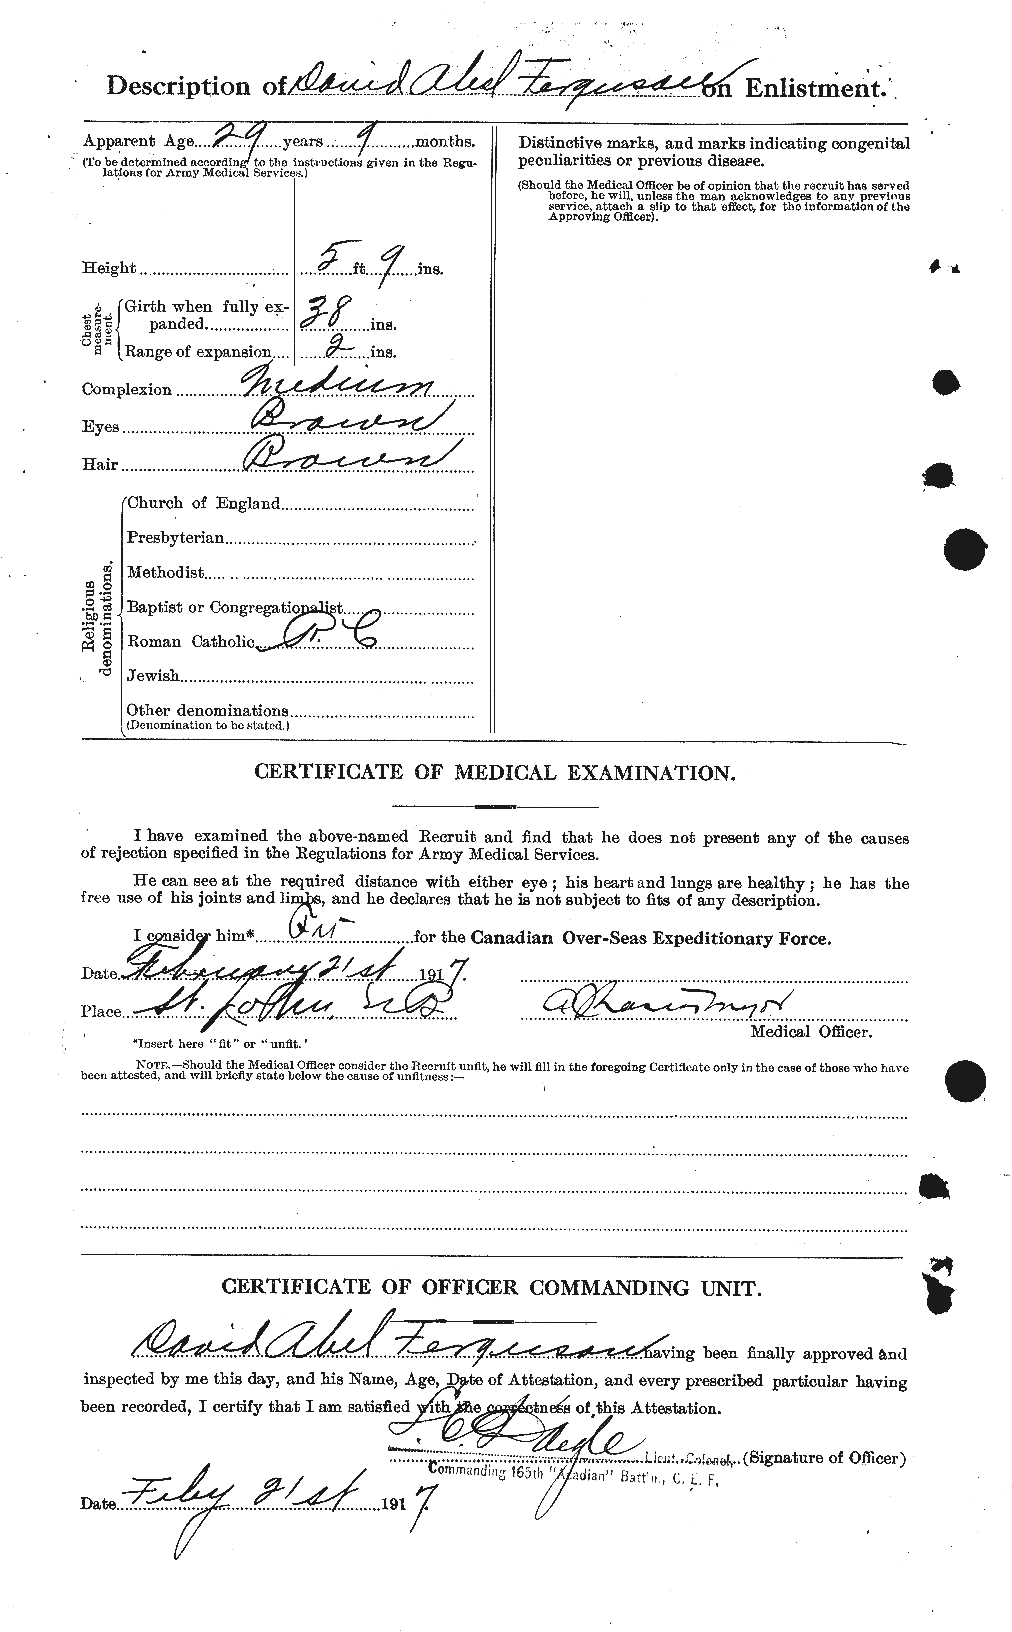 Personnel Records of the First World War - CEF 318988b